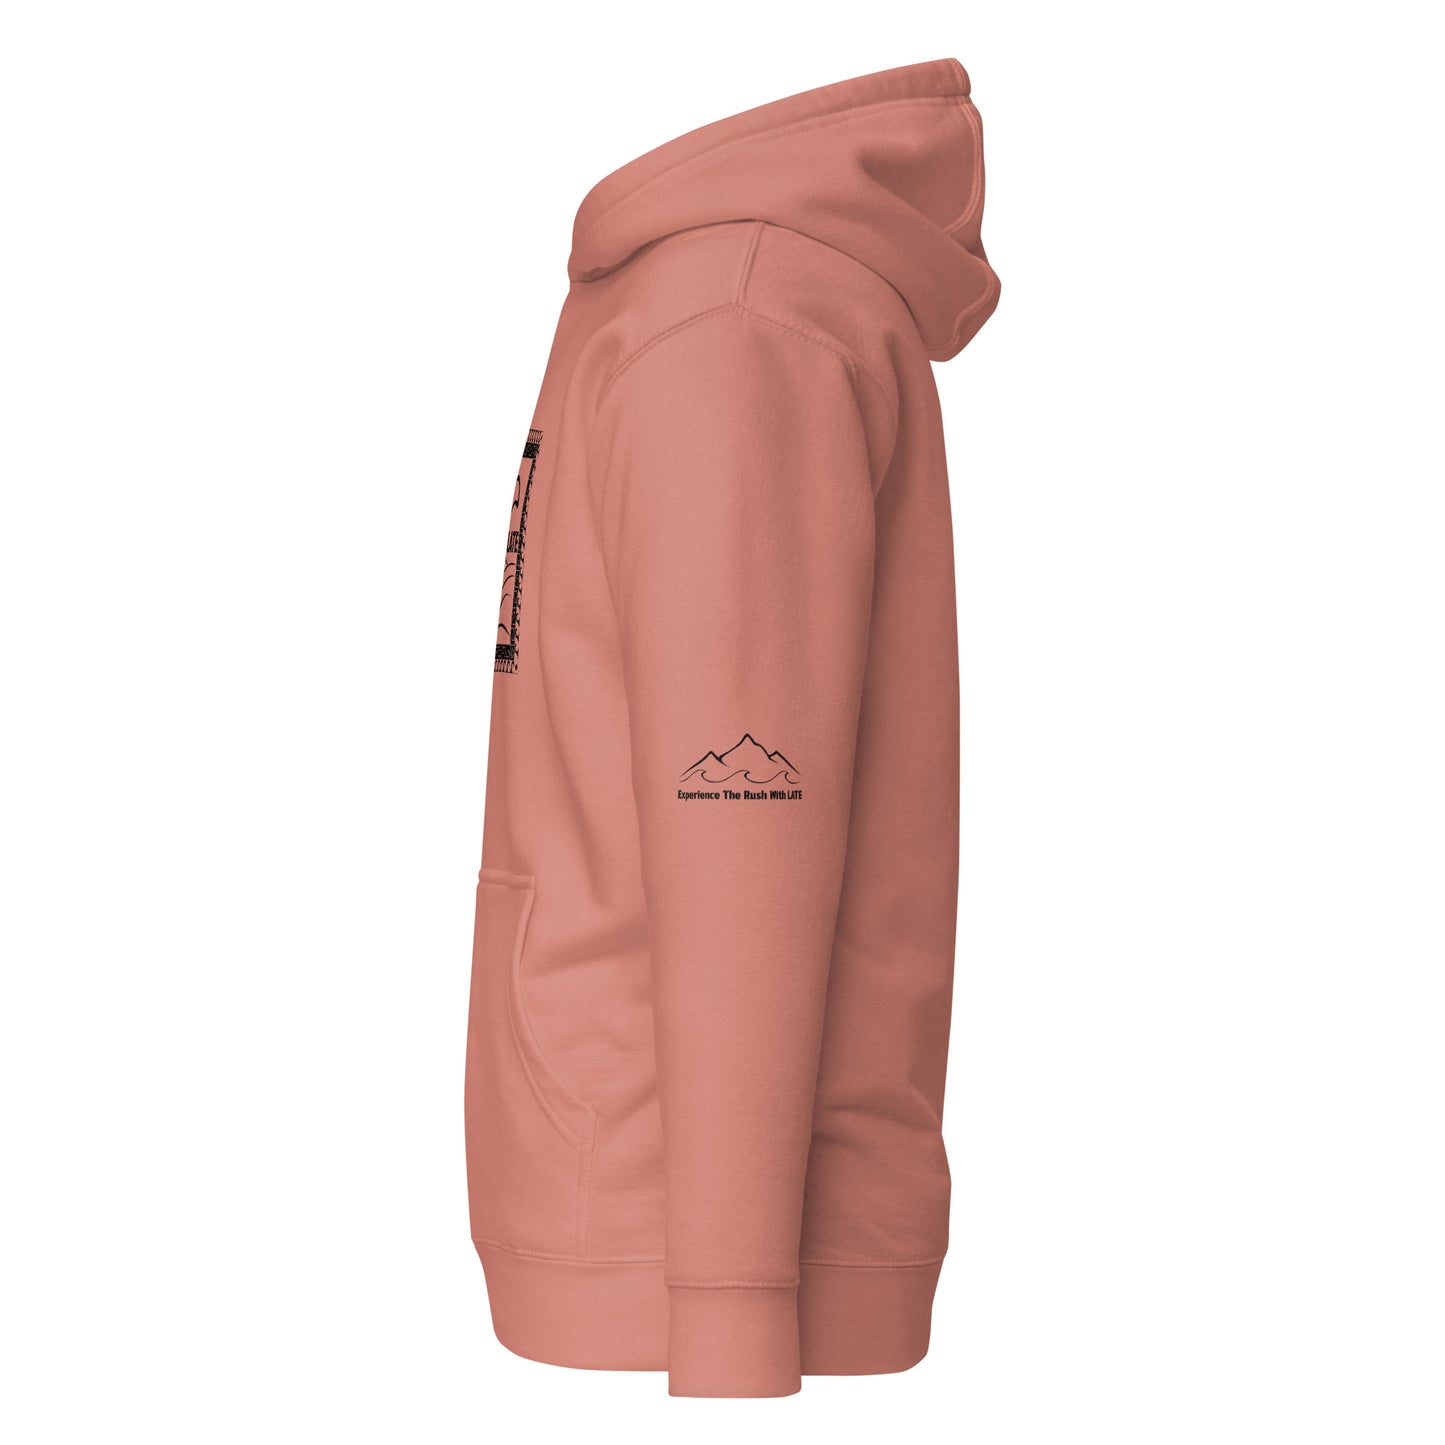 Hoodie tricky wave rose vague et sommets sur la manche gauche. Experience the rush with Late.